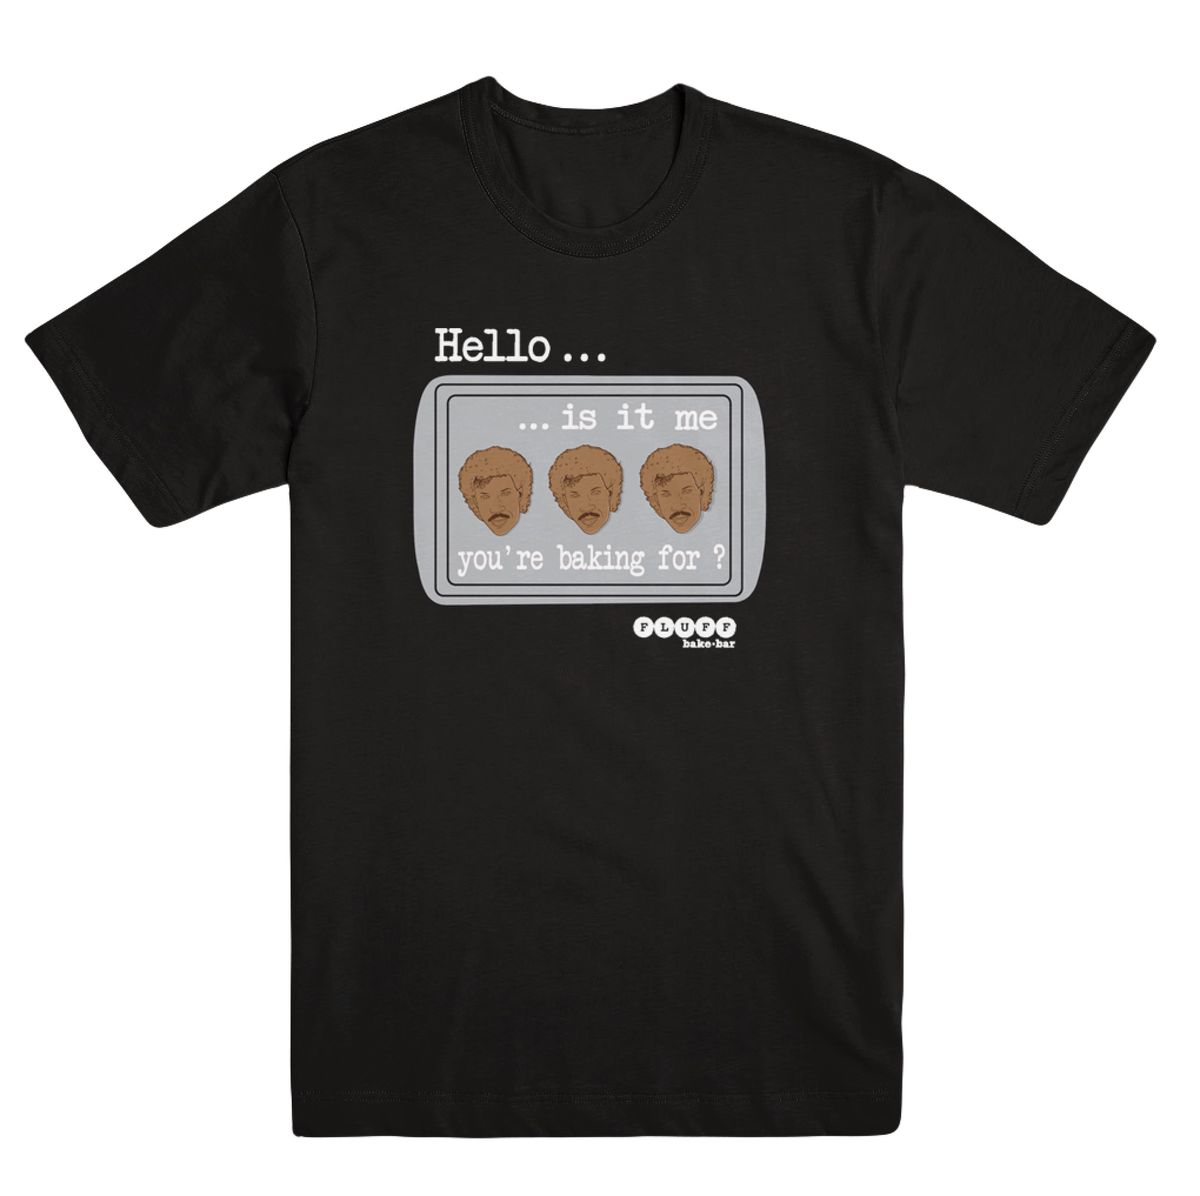 A black t-shirt emblazoned with a silver cookie sheet and three cookies shaped like Lionel Richie’s head. The text reads “Hello...is it me you’re baking for?” 